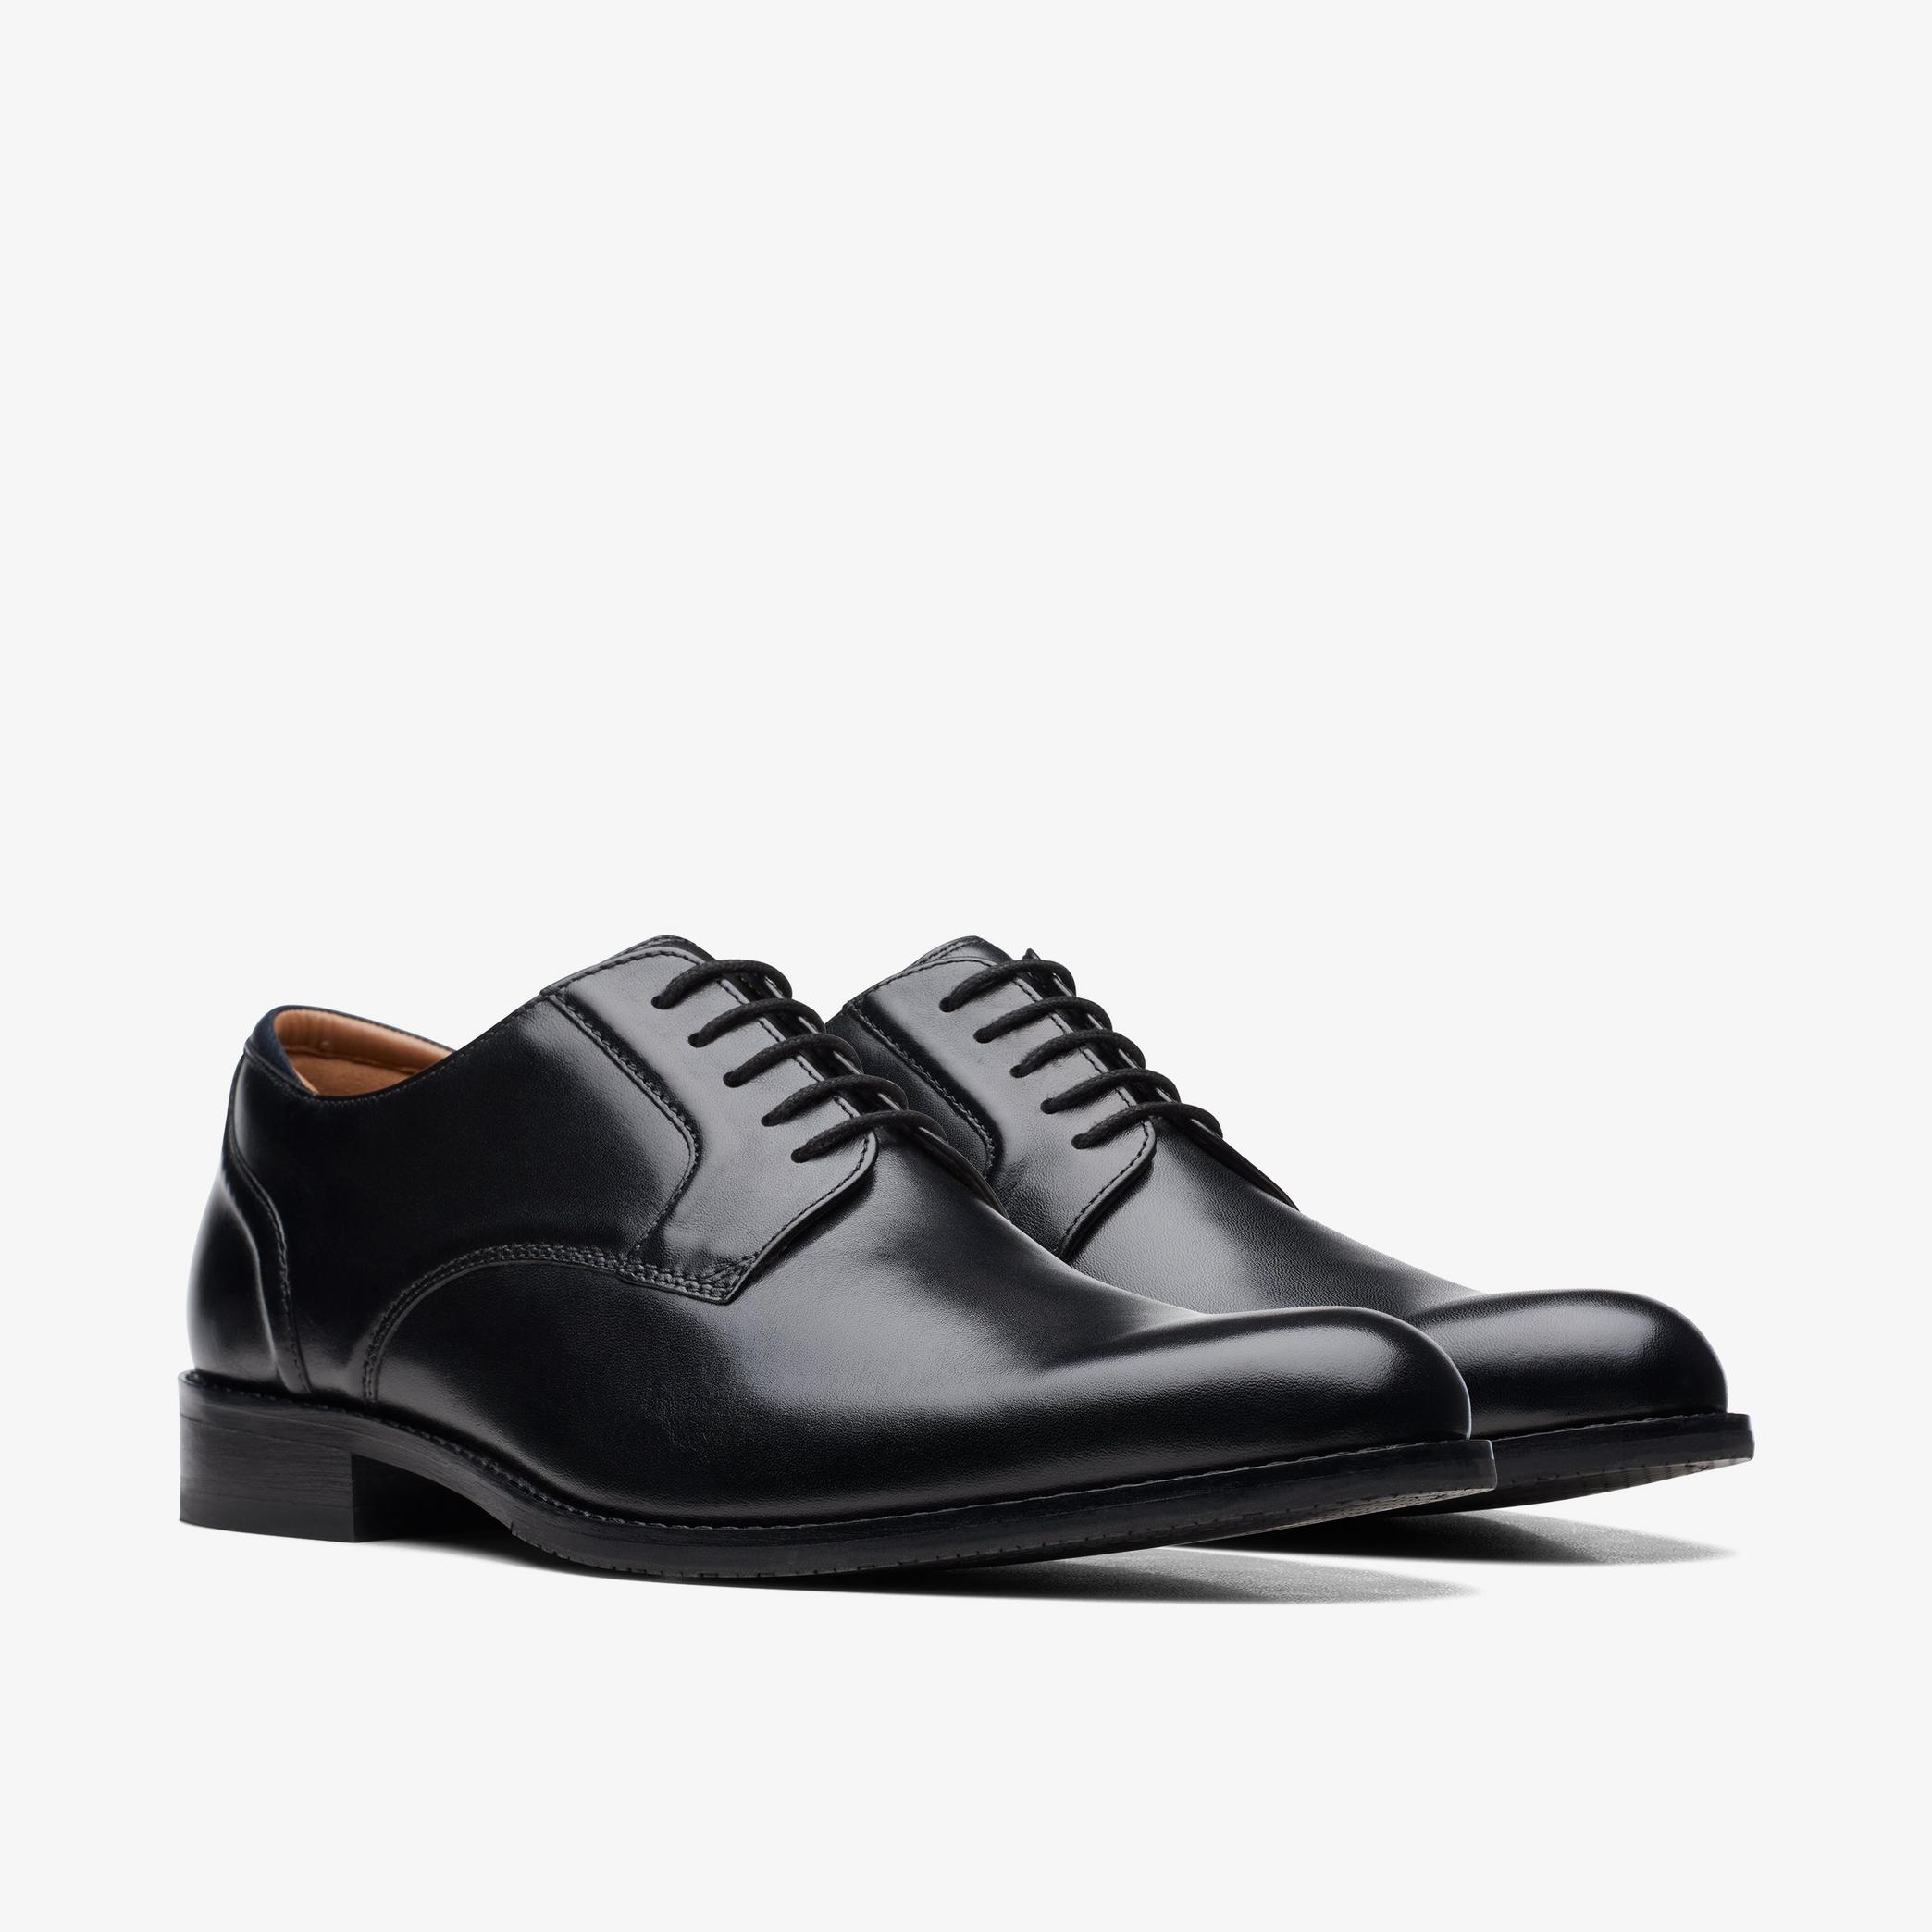 Craft Arlo Lace Black Leather Oxford Shoes, view 4 of 6